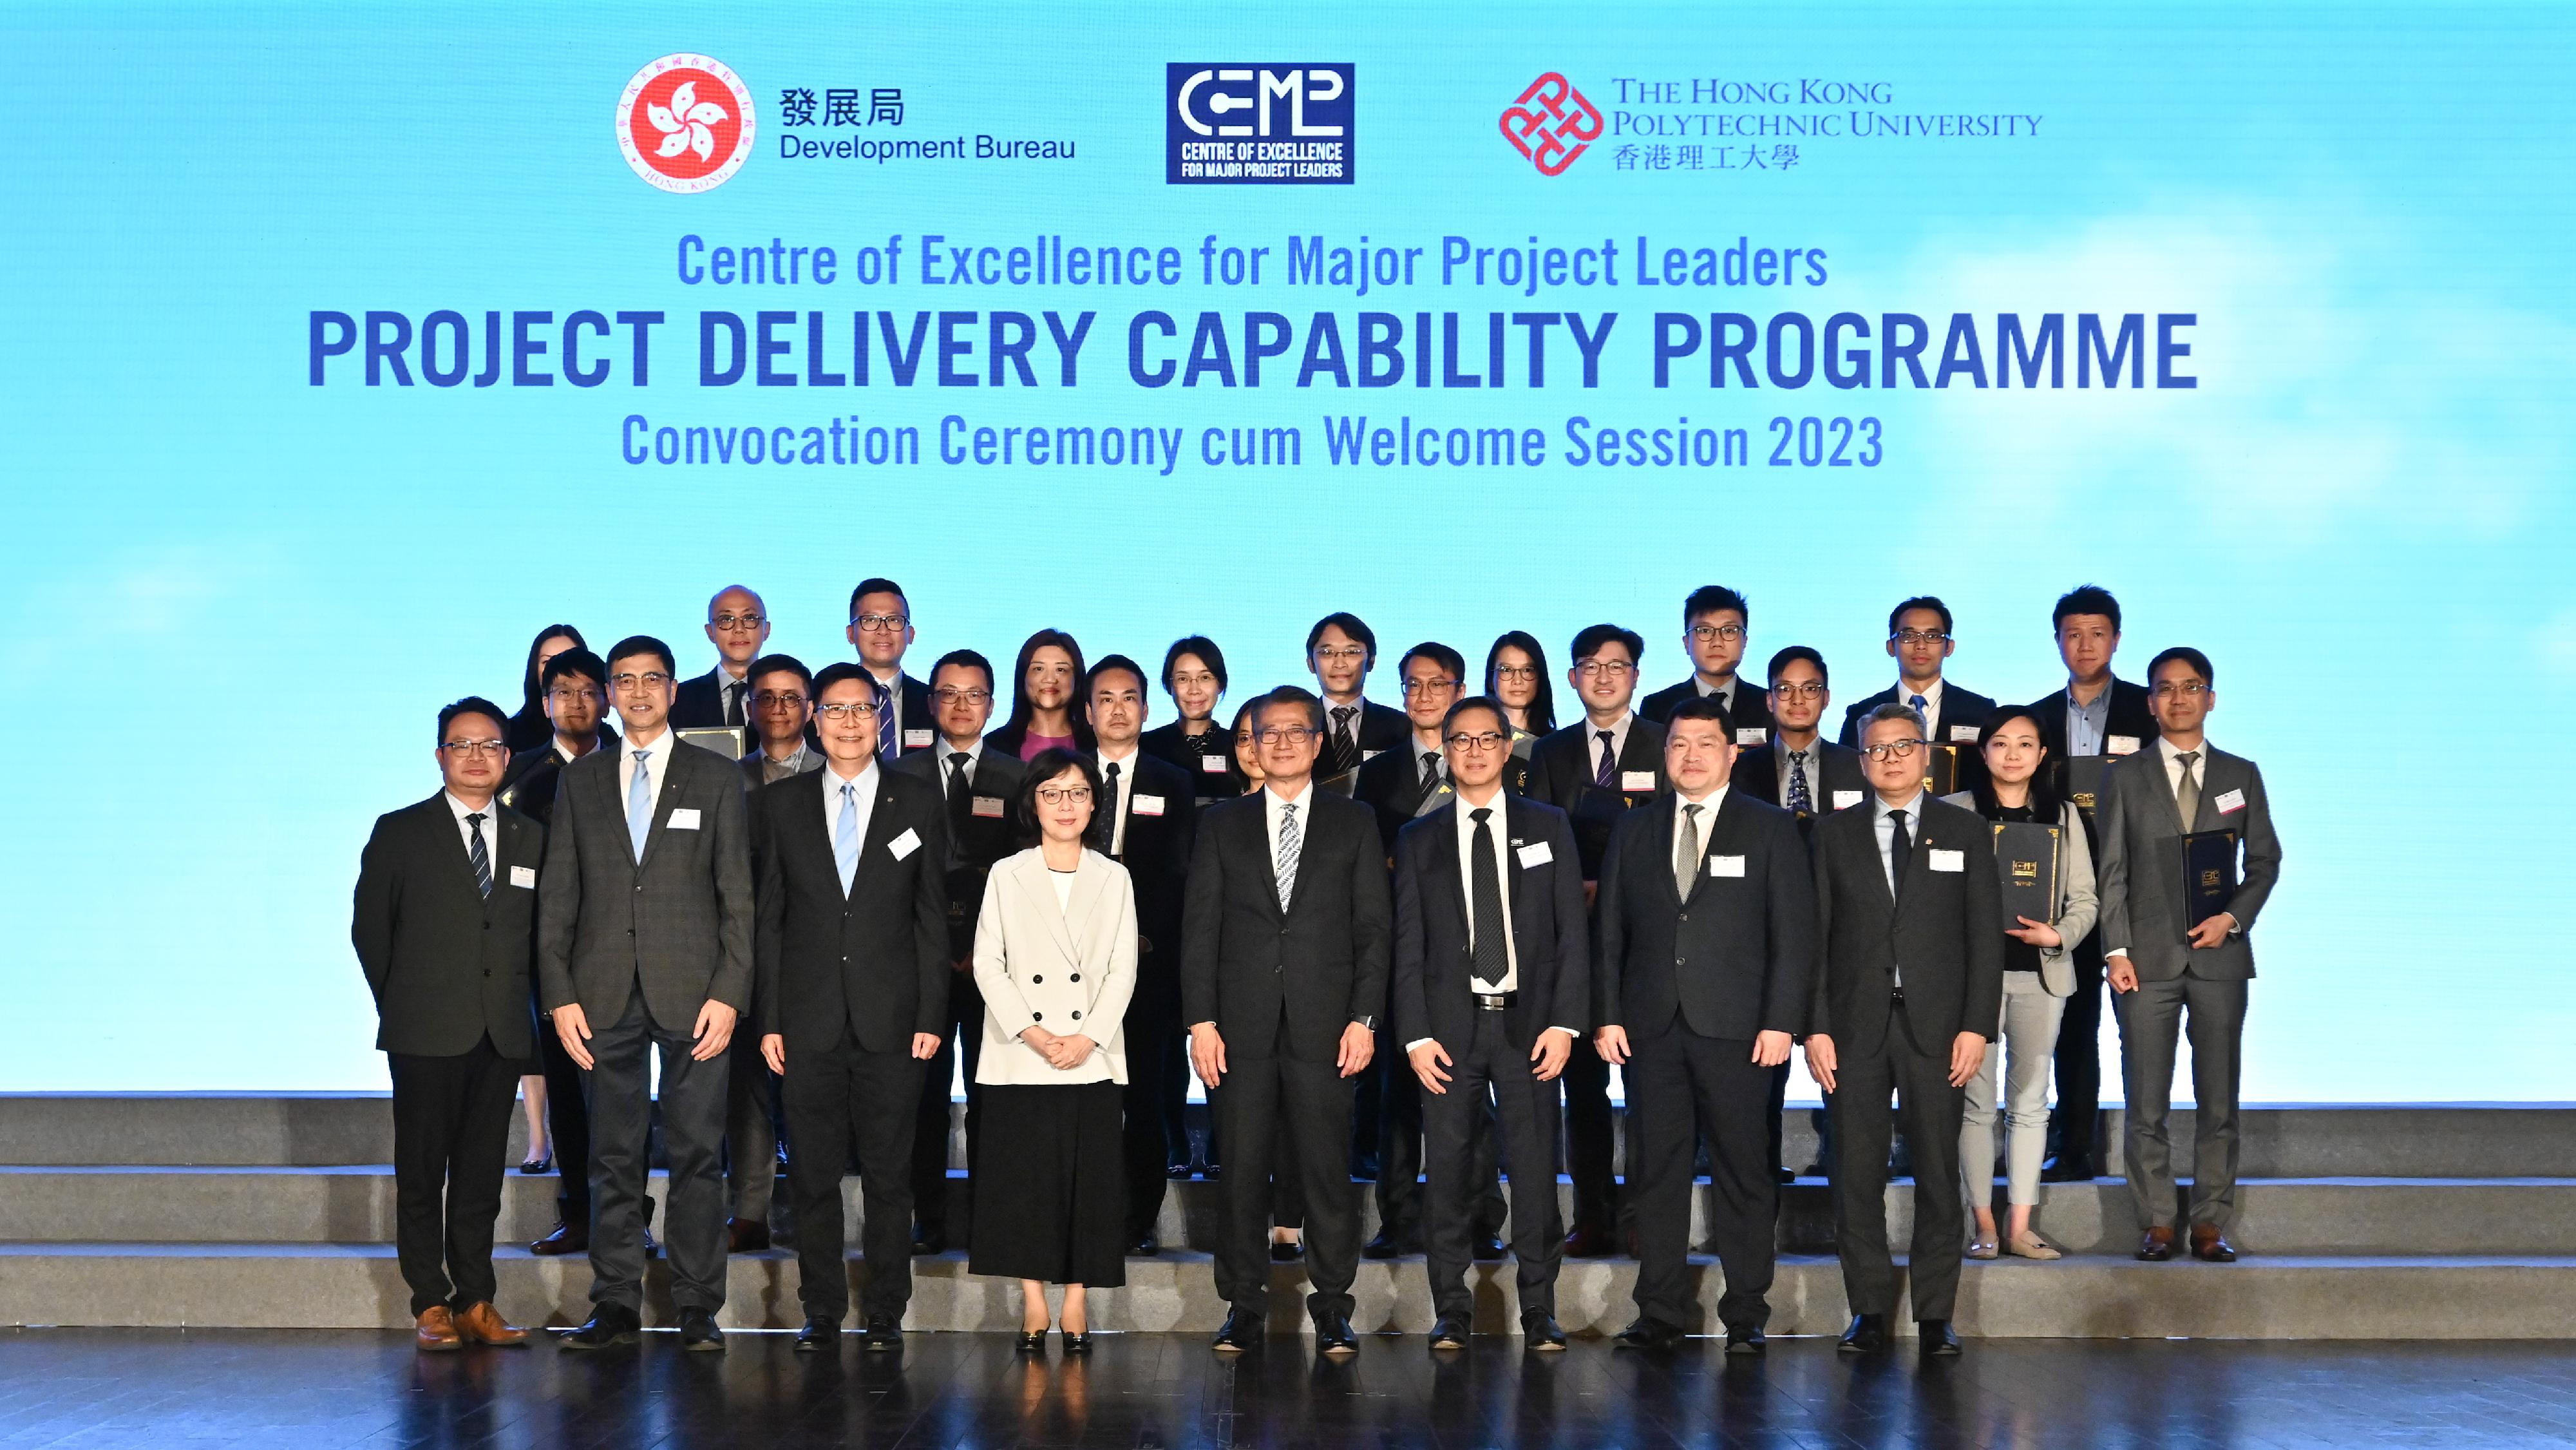 The Centre of Excellence for Major Project Leaders (CoE) under the Development Bureau held the Convocation Ceremony cum Welcome Session 2023 of its Project Delivery Capability Programme today (March 6). Photo shows the Financial Secretary and Honorary President of the CoE, Mr Paul Chan (first row, fourth right); the Secretary for Development and Chairman of the CoE, Ms Bernadette Linn (first row, fourth left); the Permanent Secretary for Development (Works) and Superintendent of the CoE, Mr Ricky Lau (first row, third right), the Dean of Students and Chair Professor of Construction Engineering and Management of the Hong Kong Polytechnic University, Professor Albert Chan (first row, third left); and the Head of Project Strategy and Governance Office of the Development Bureau, Mr John Kwong (first row, second right), with other guests and graduates at the ceremony.